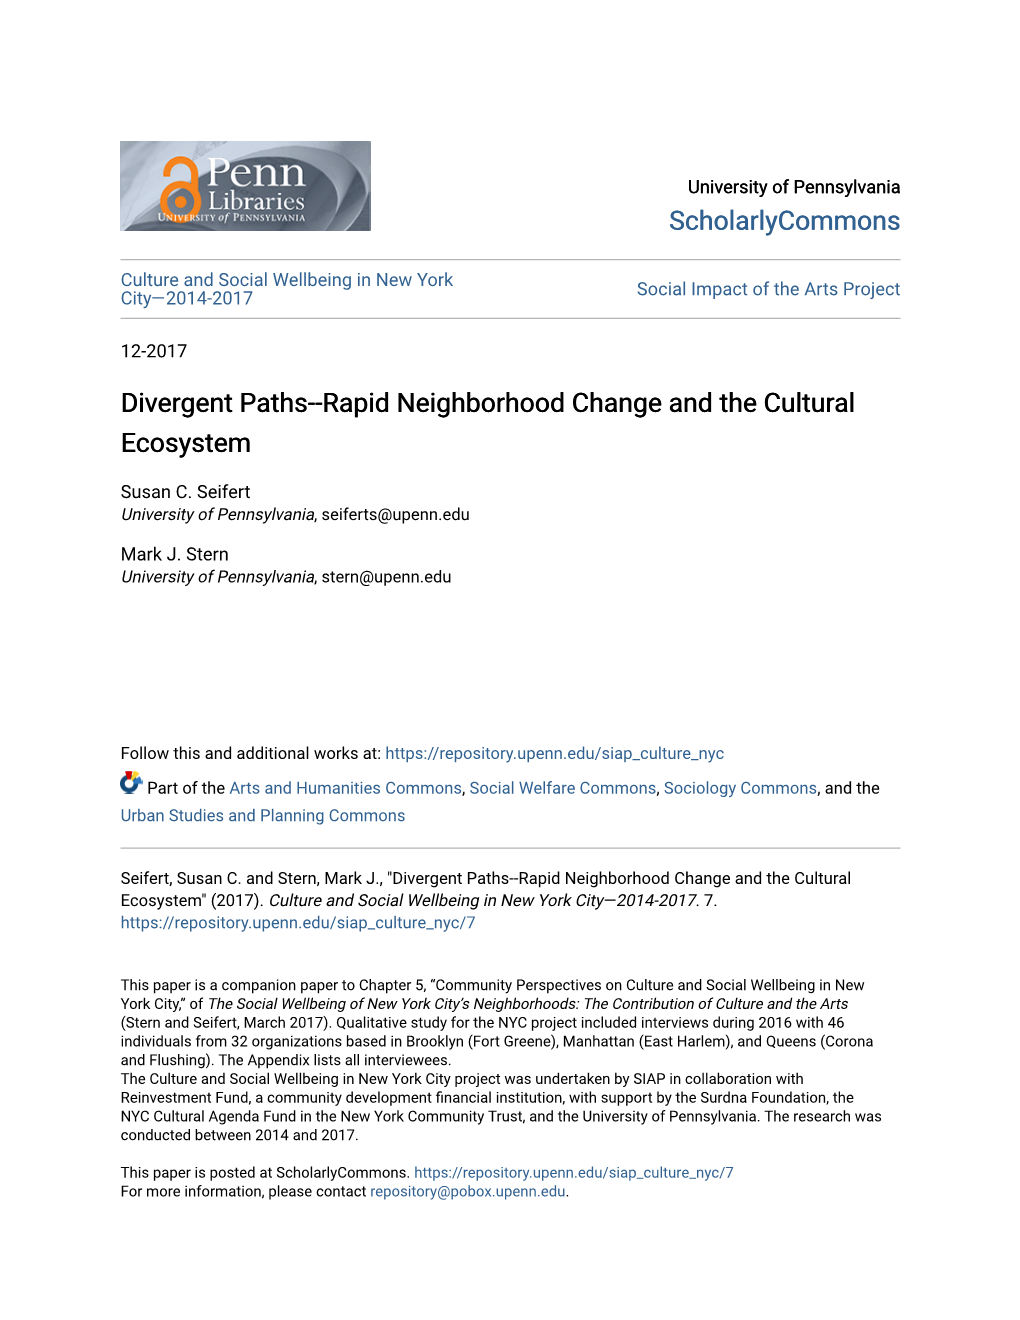 Divergent Paths--Rapid Neighborhood Change and the Cultural Ecosystem